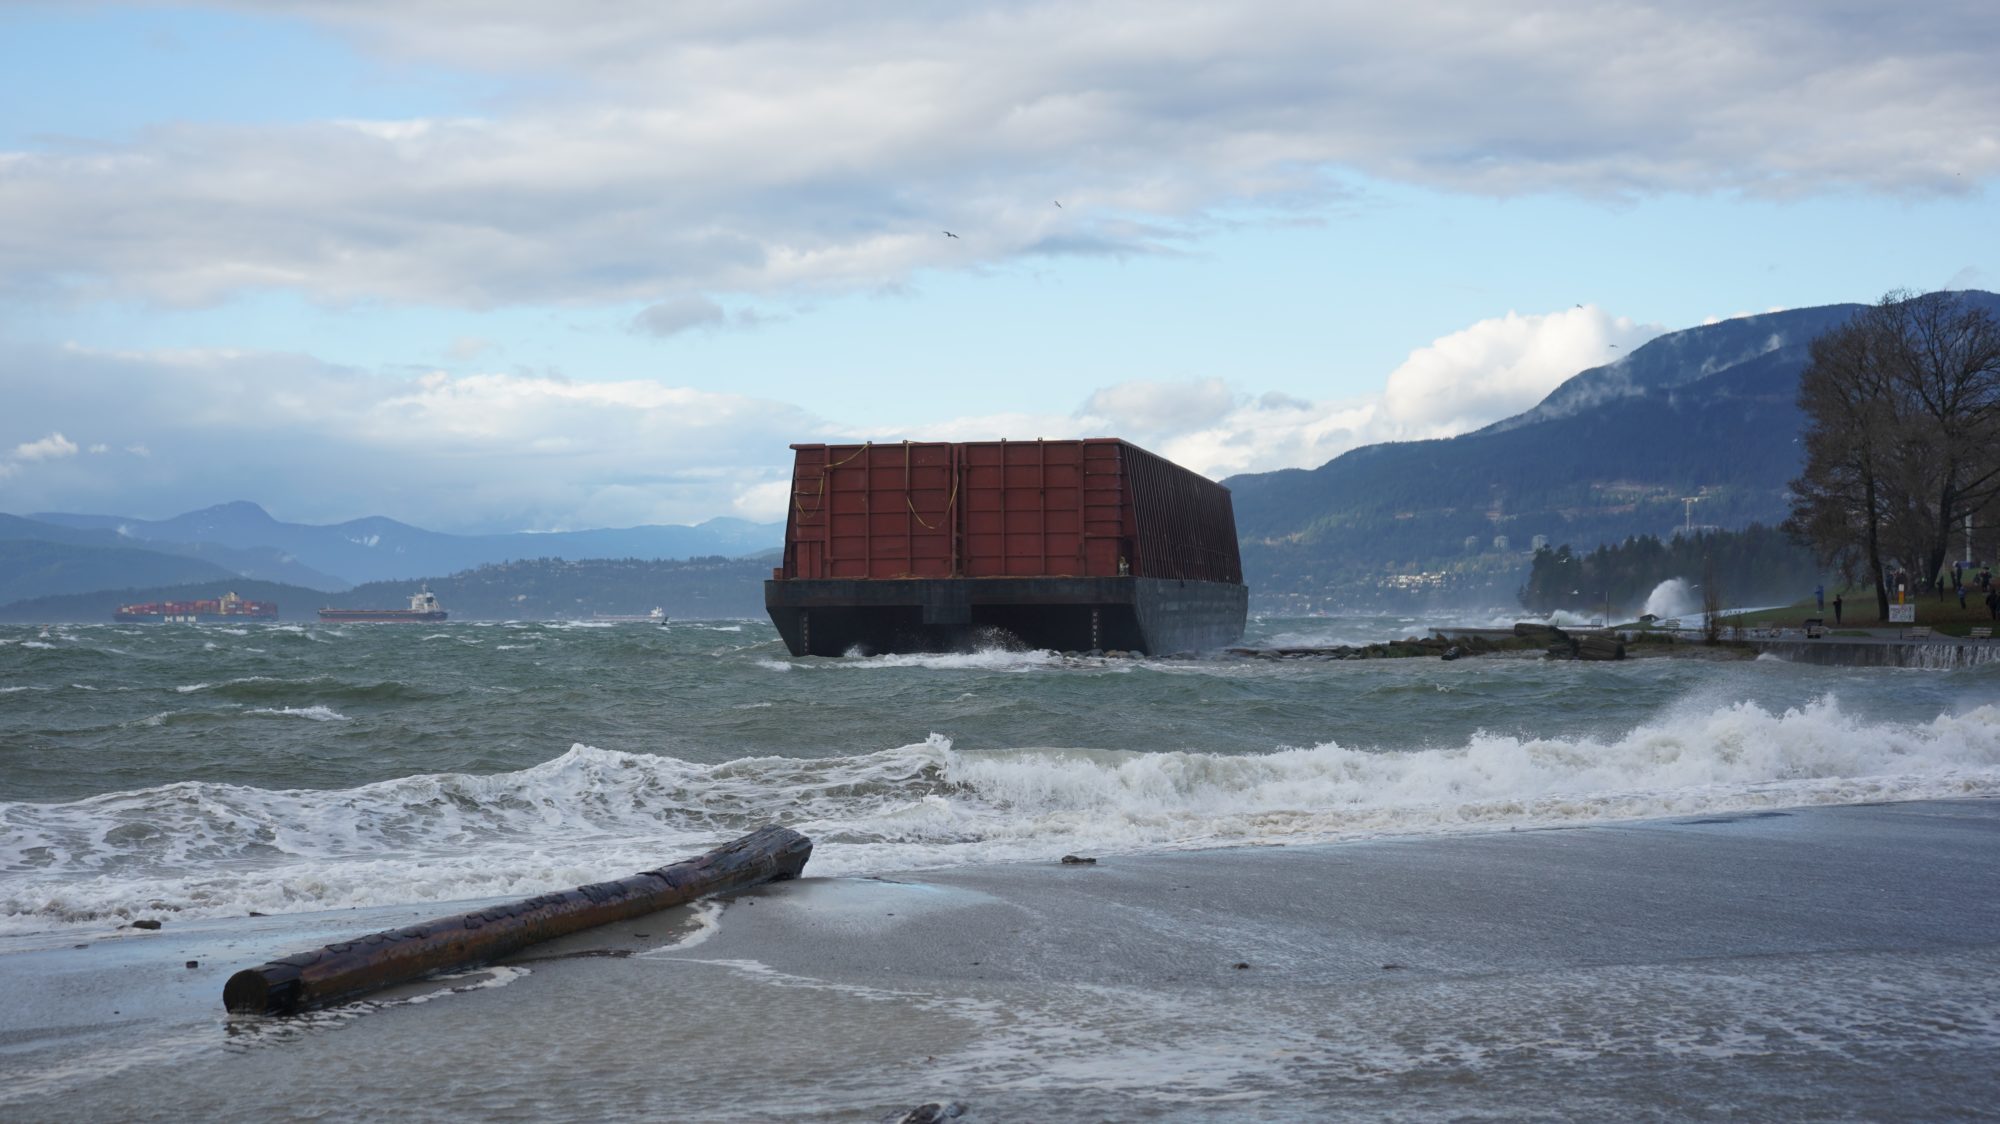 Barge on the seawall